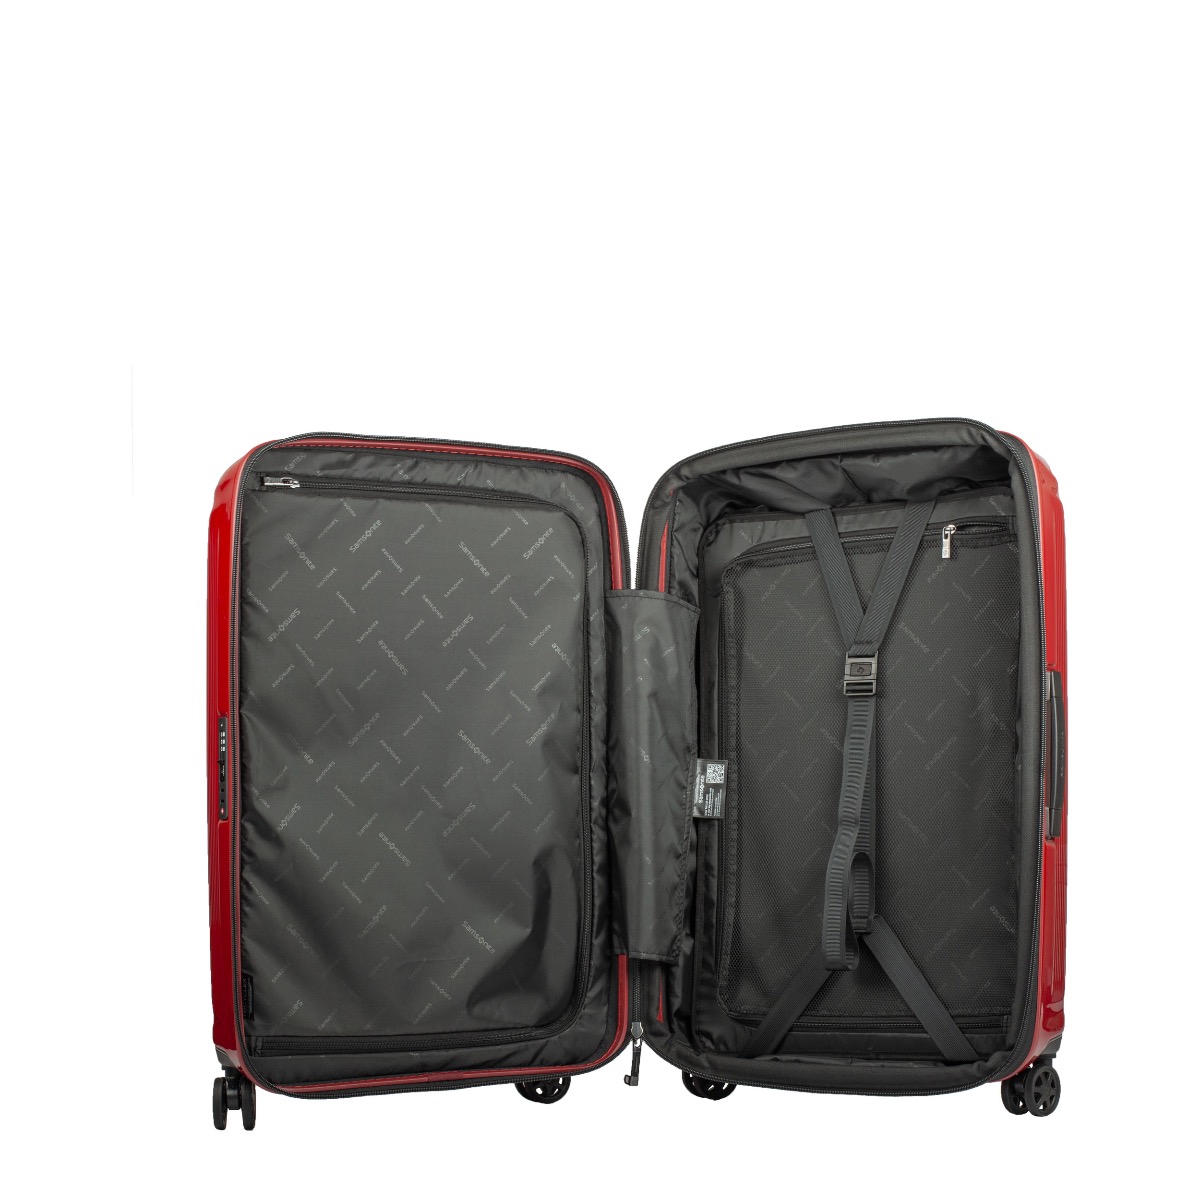 Valise 69cm extensible - Nuon